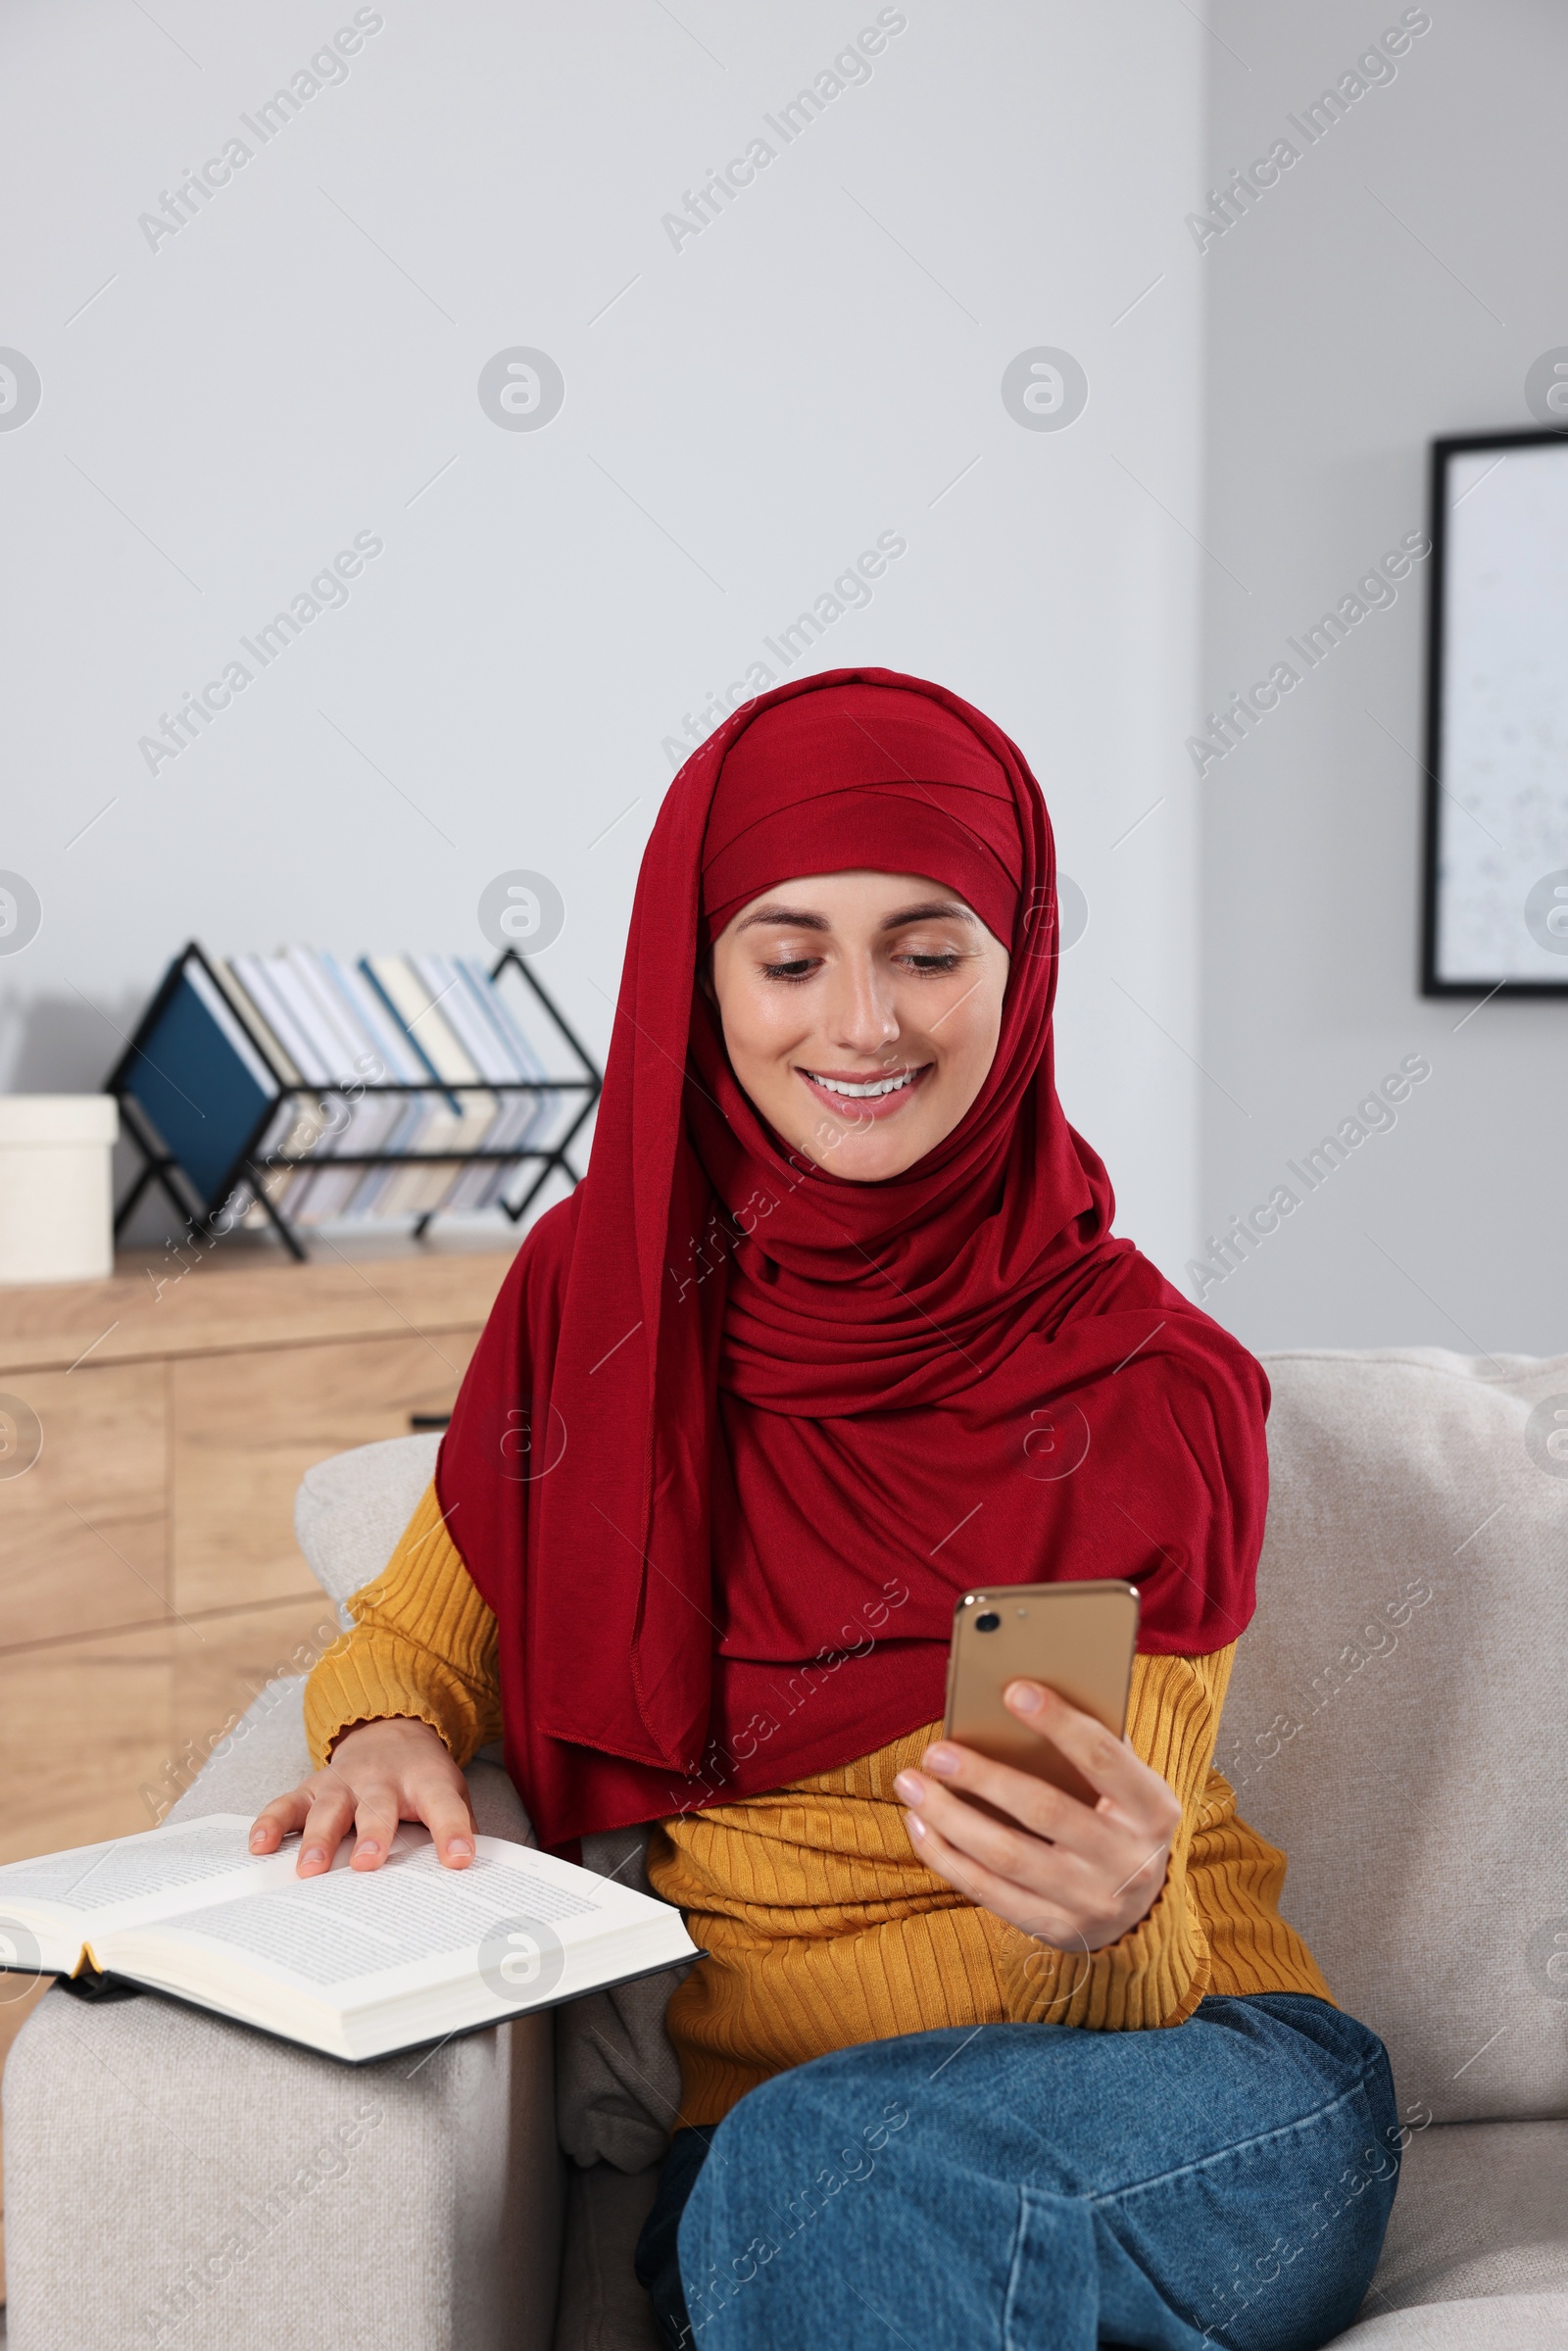 Photo of Muslim woman with book using smartphone on couch in room